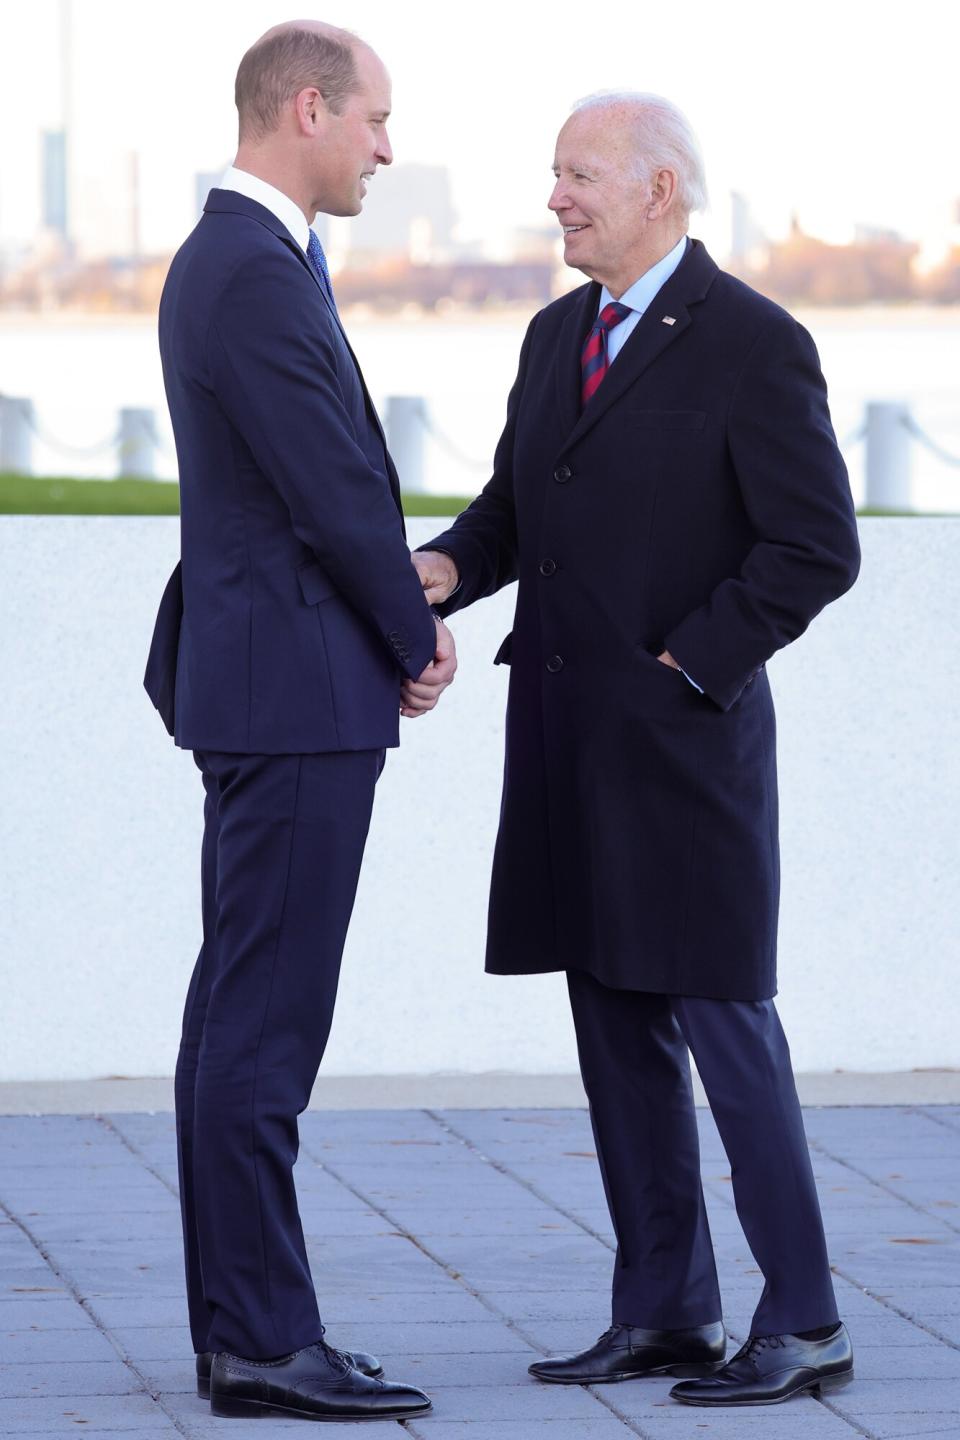 Prince William, Prince of Wales meets with US President Joe Biden at the John F. Kennedy Presidential Library and Museum on December 02, 2022 in Boston, Massachusetts. The Prince and Princess of Wales are visiting the coastal city of Boston to attend the second annual Earthshot Prize Awards Ceremony, an event which celebrates those whose work is helping to repair the planet. During their trip, which will last for three days, the royal couple will learn about the environmental challenges Boston faces as well as meeting those who are combating the effects of climate change in the area.